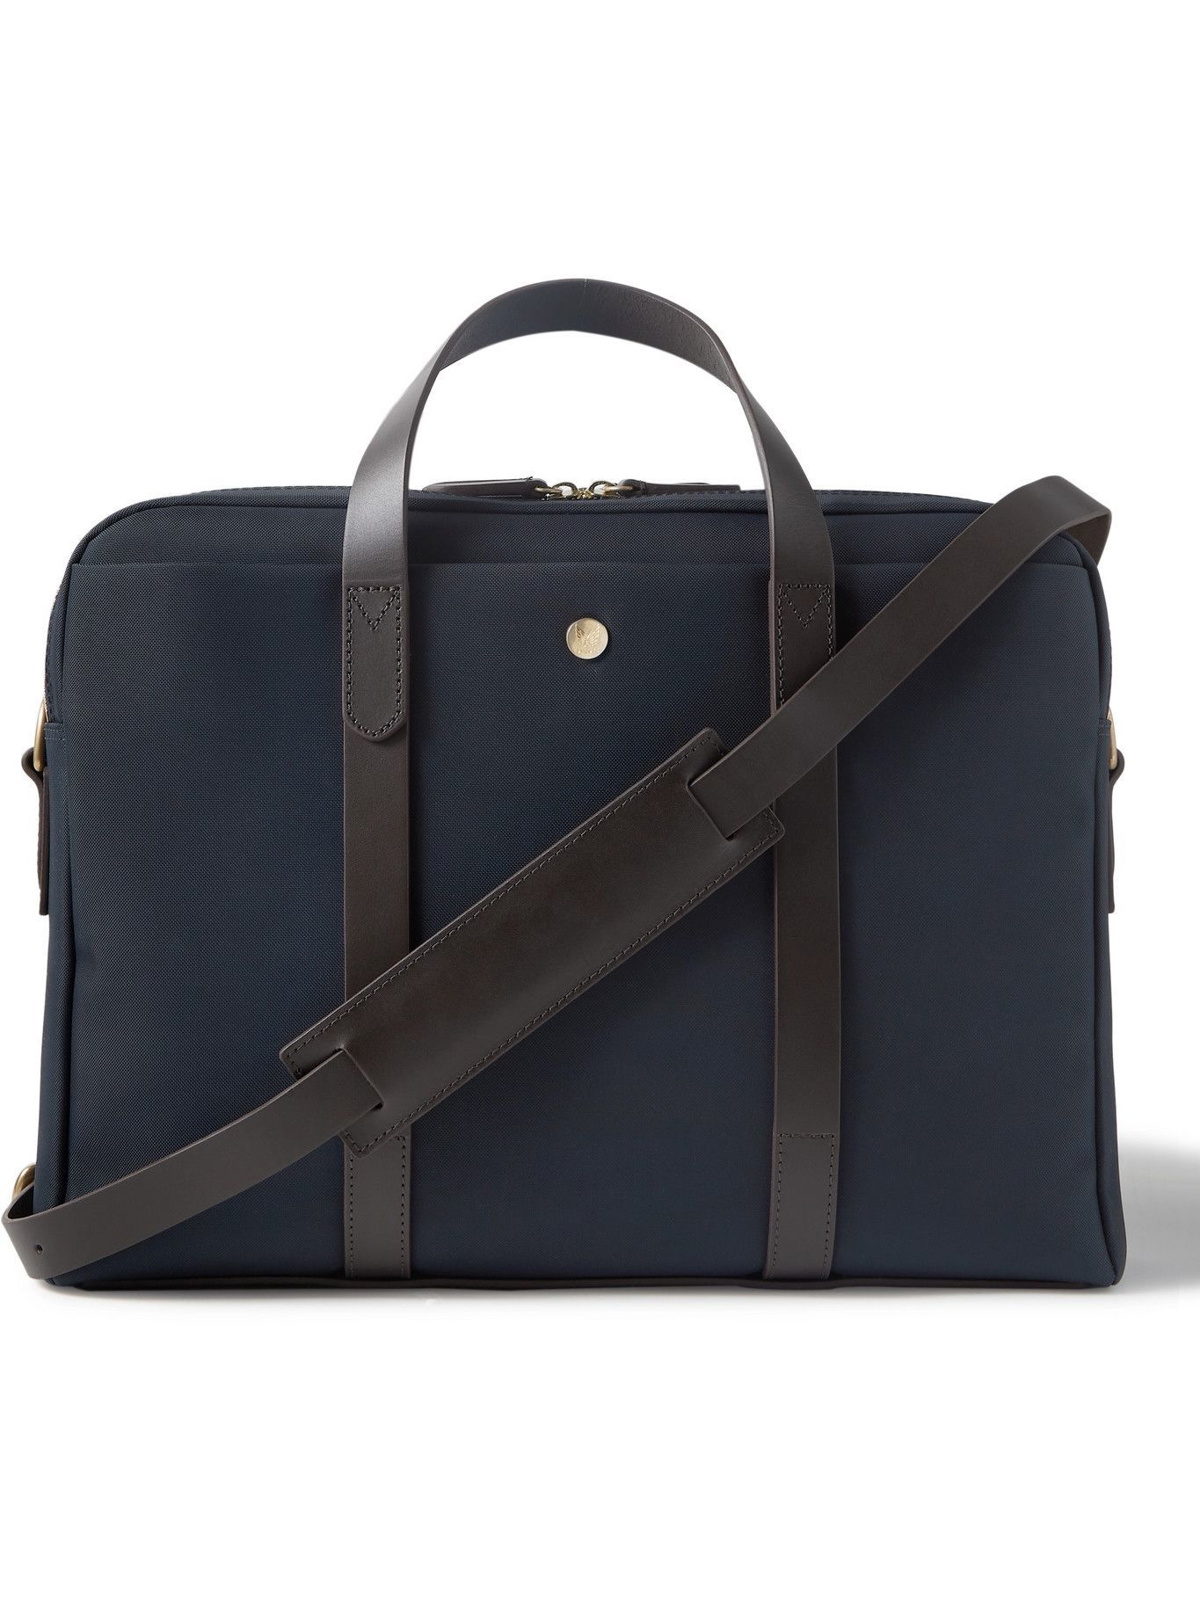 MISMO - Endeavour Leather-Trimmed Nylon Briefcase Mismo